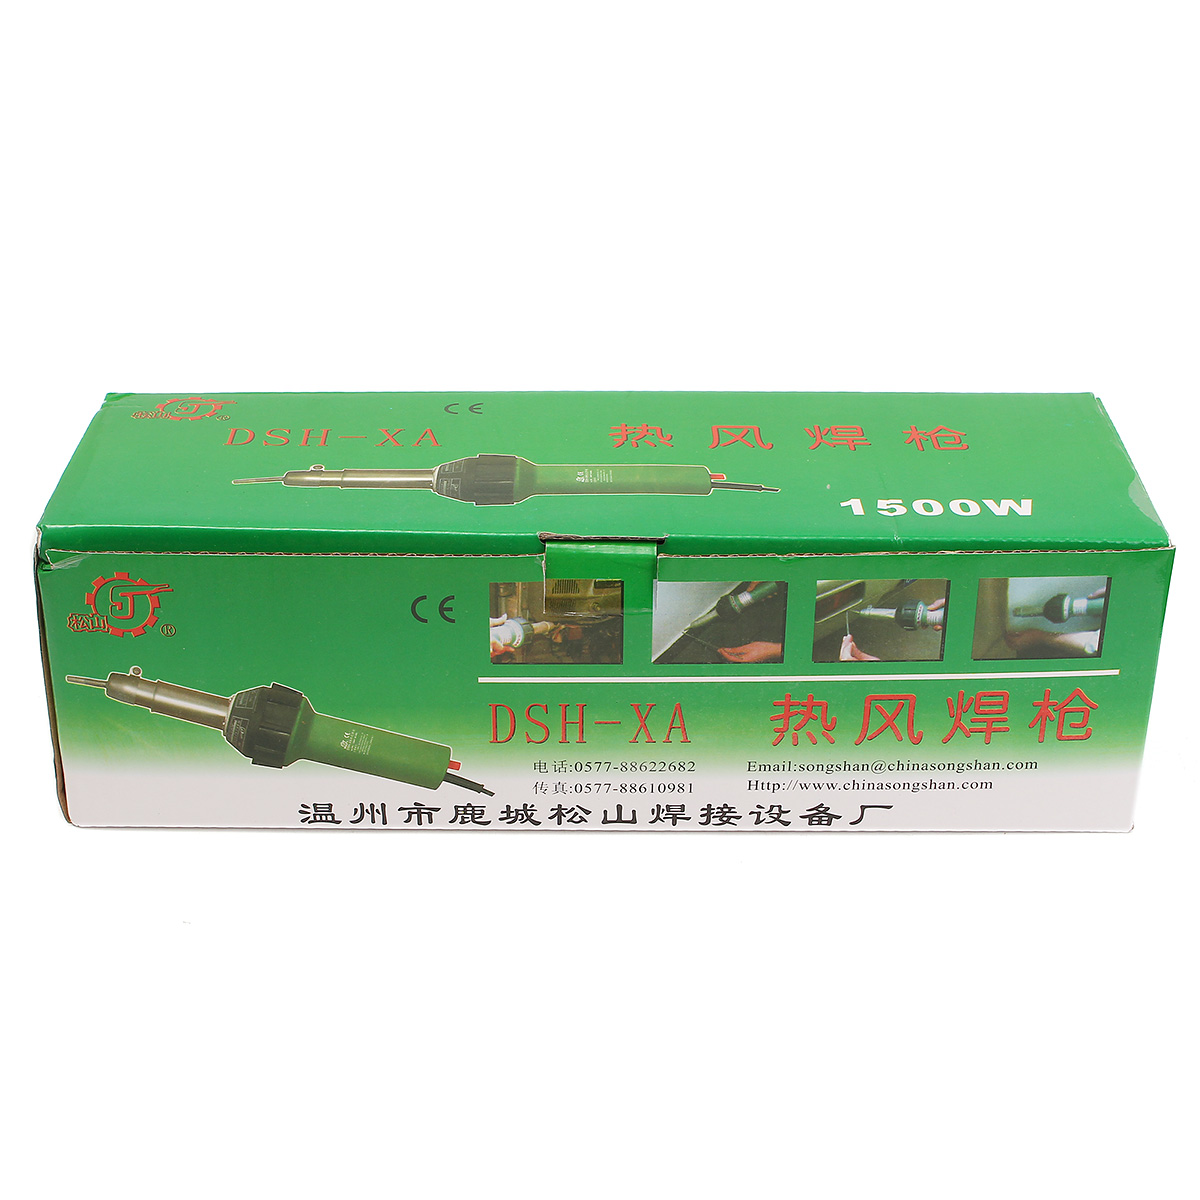 1600W-Plastic-Welding-Hot-Air-Gun-with-2Pcs-Speed-Welding-Nozzle-and-Extra-HE-Rod-Welding-1112868-9